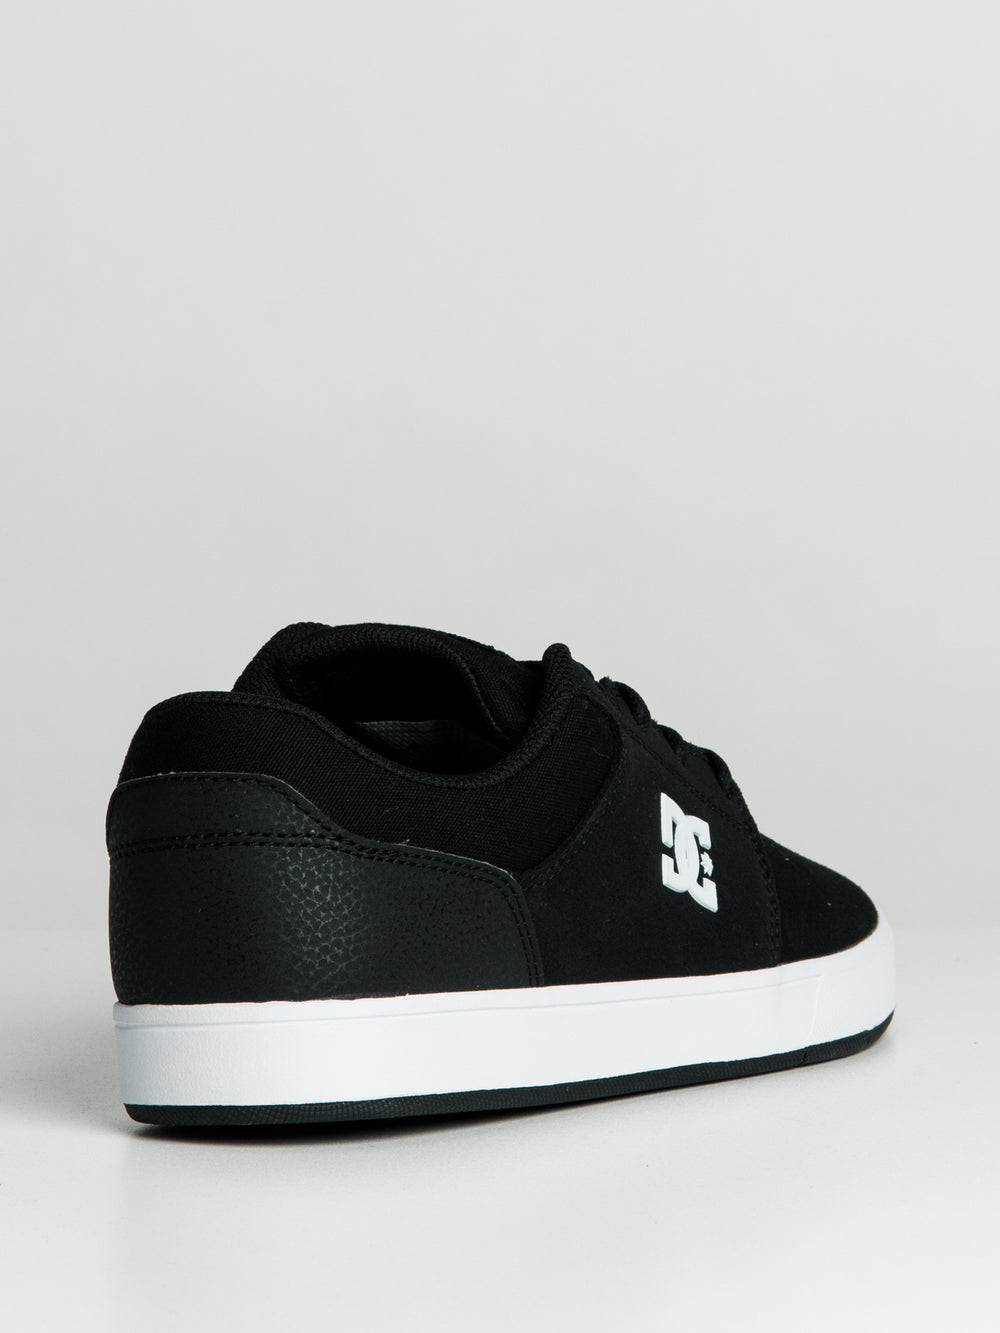 MENS DC SHOES CRISIS 2 SNEAKER - CLEARANCE